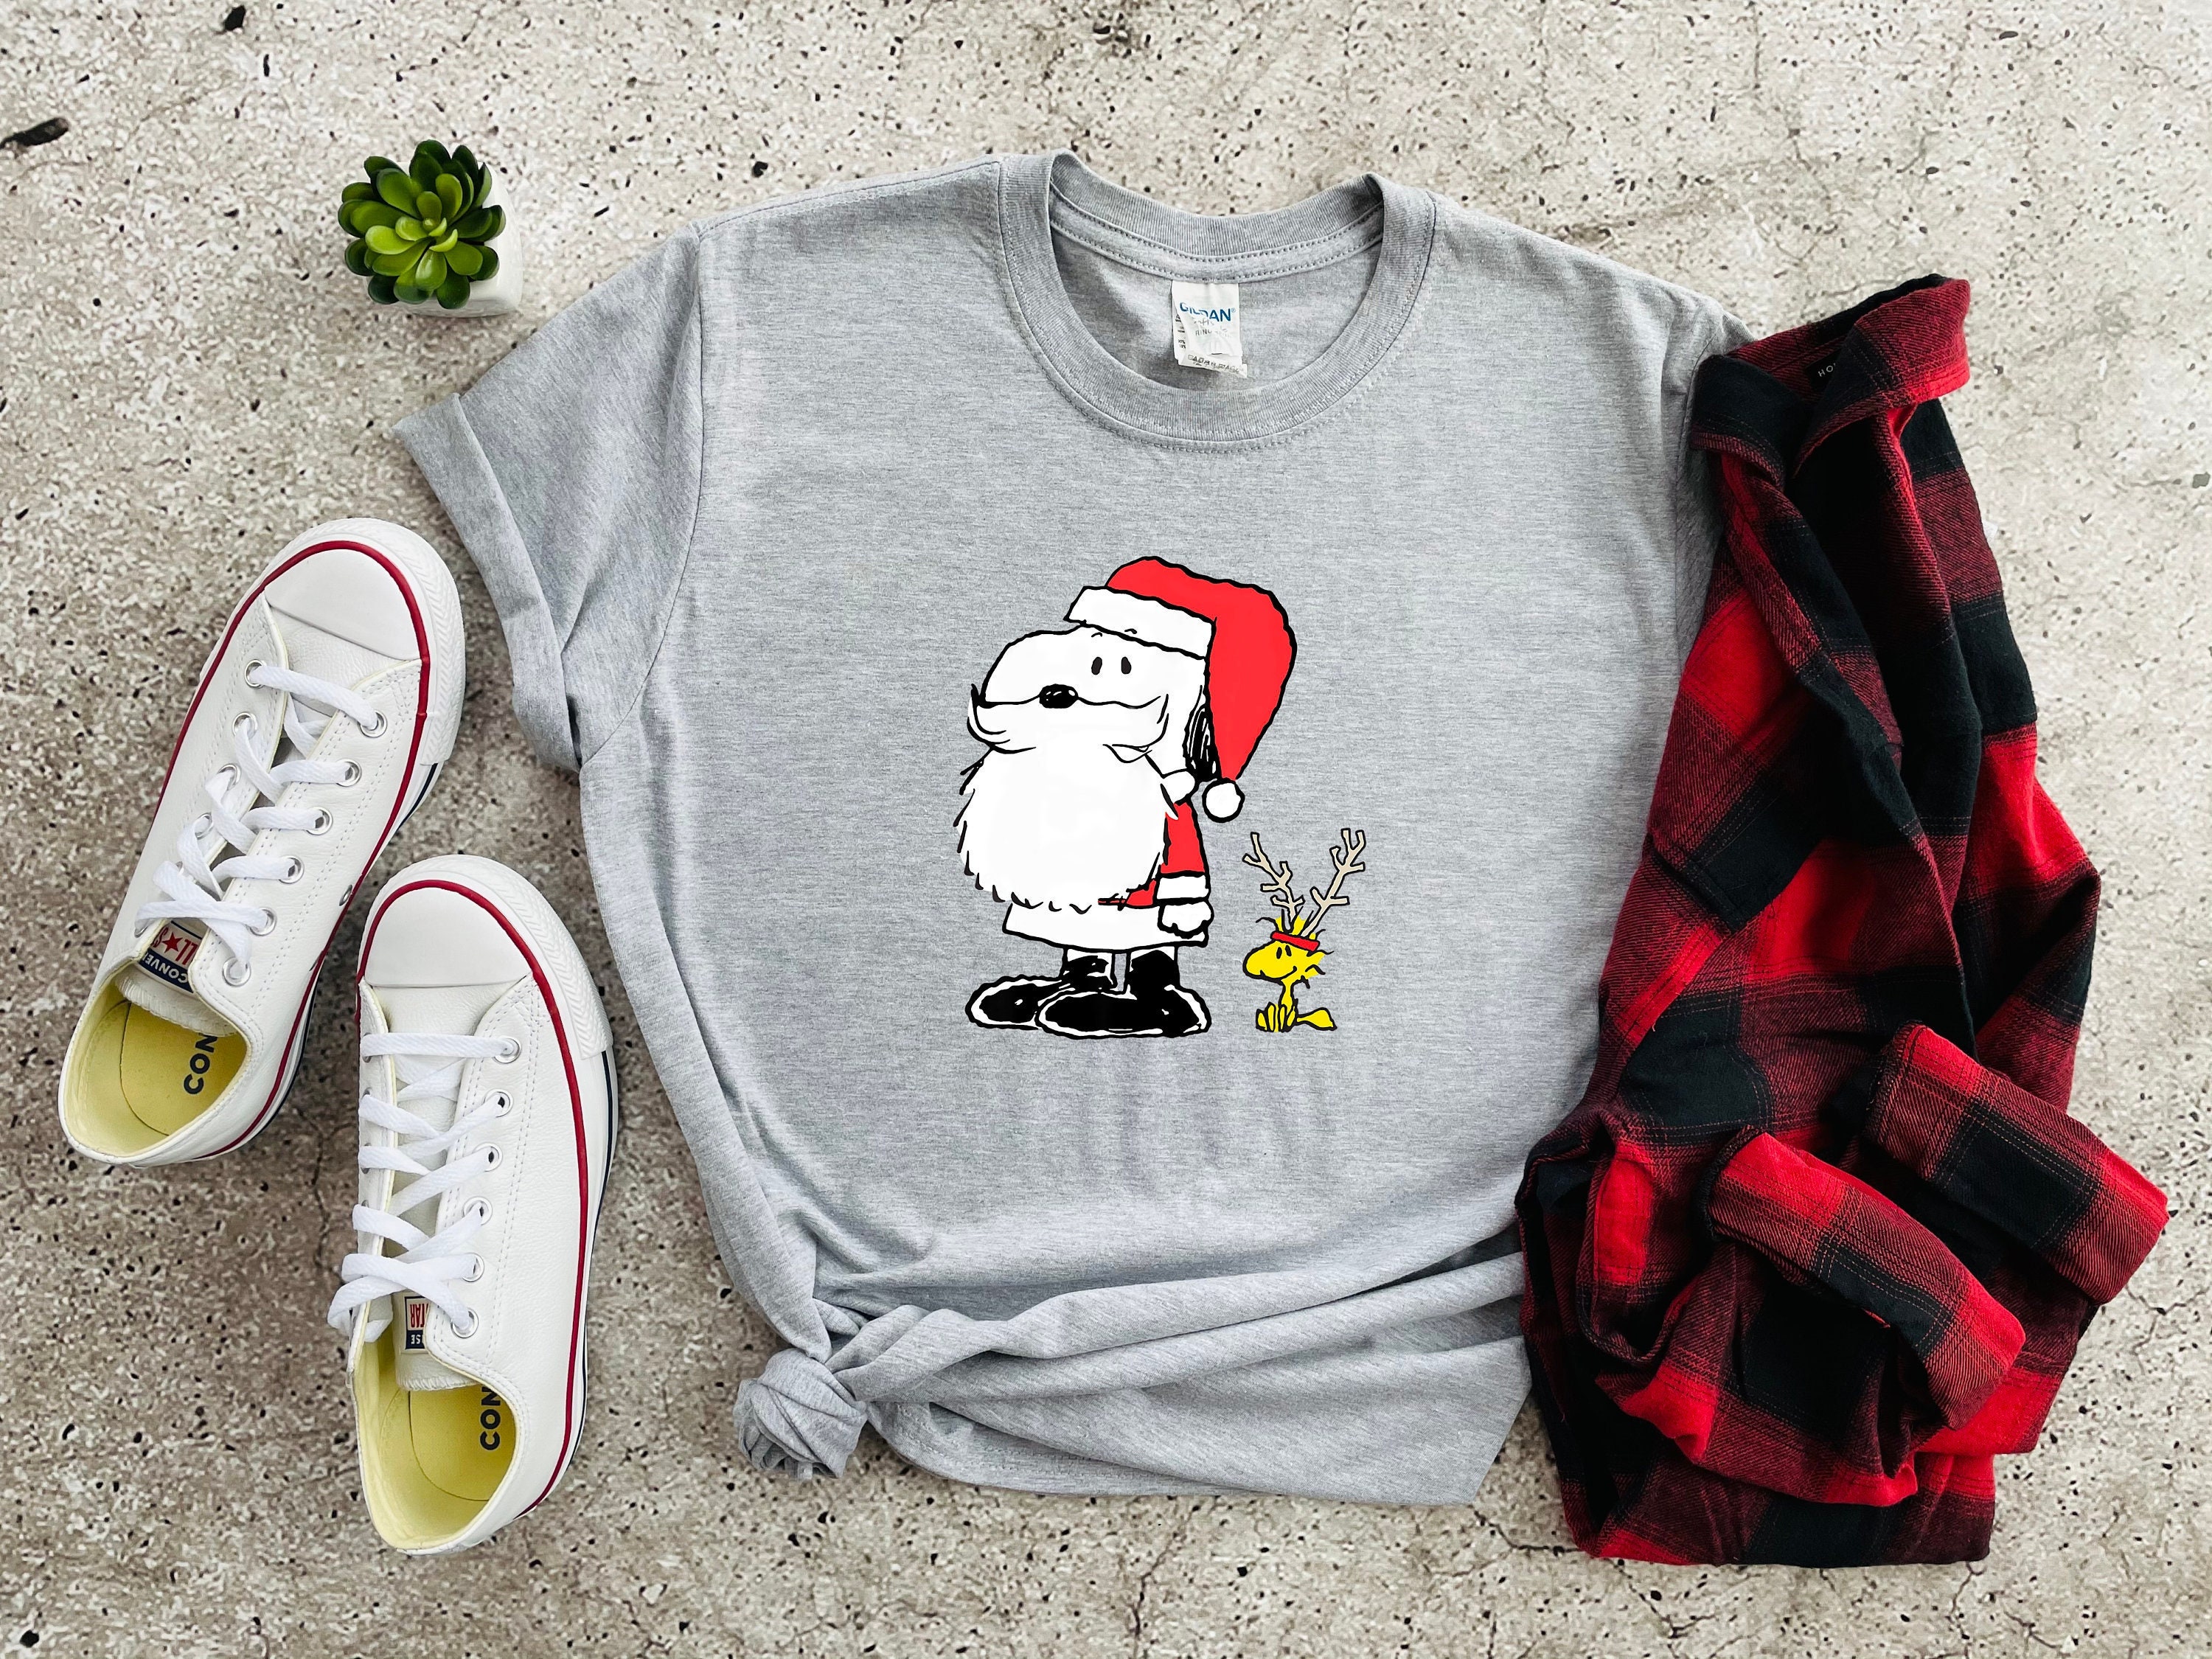 The Beatles And Snoopy Christmas Time Here Again Christmas Shirt, Xmas Shirt,Christmas Shirt, Christmas Gifts Shirt